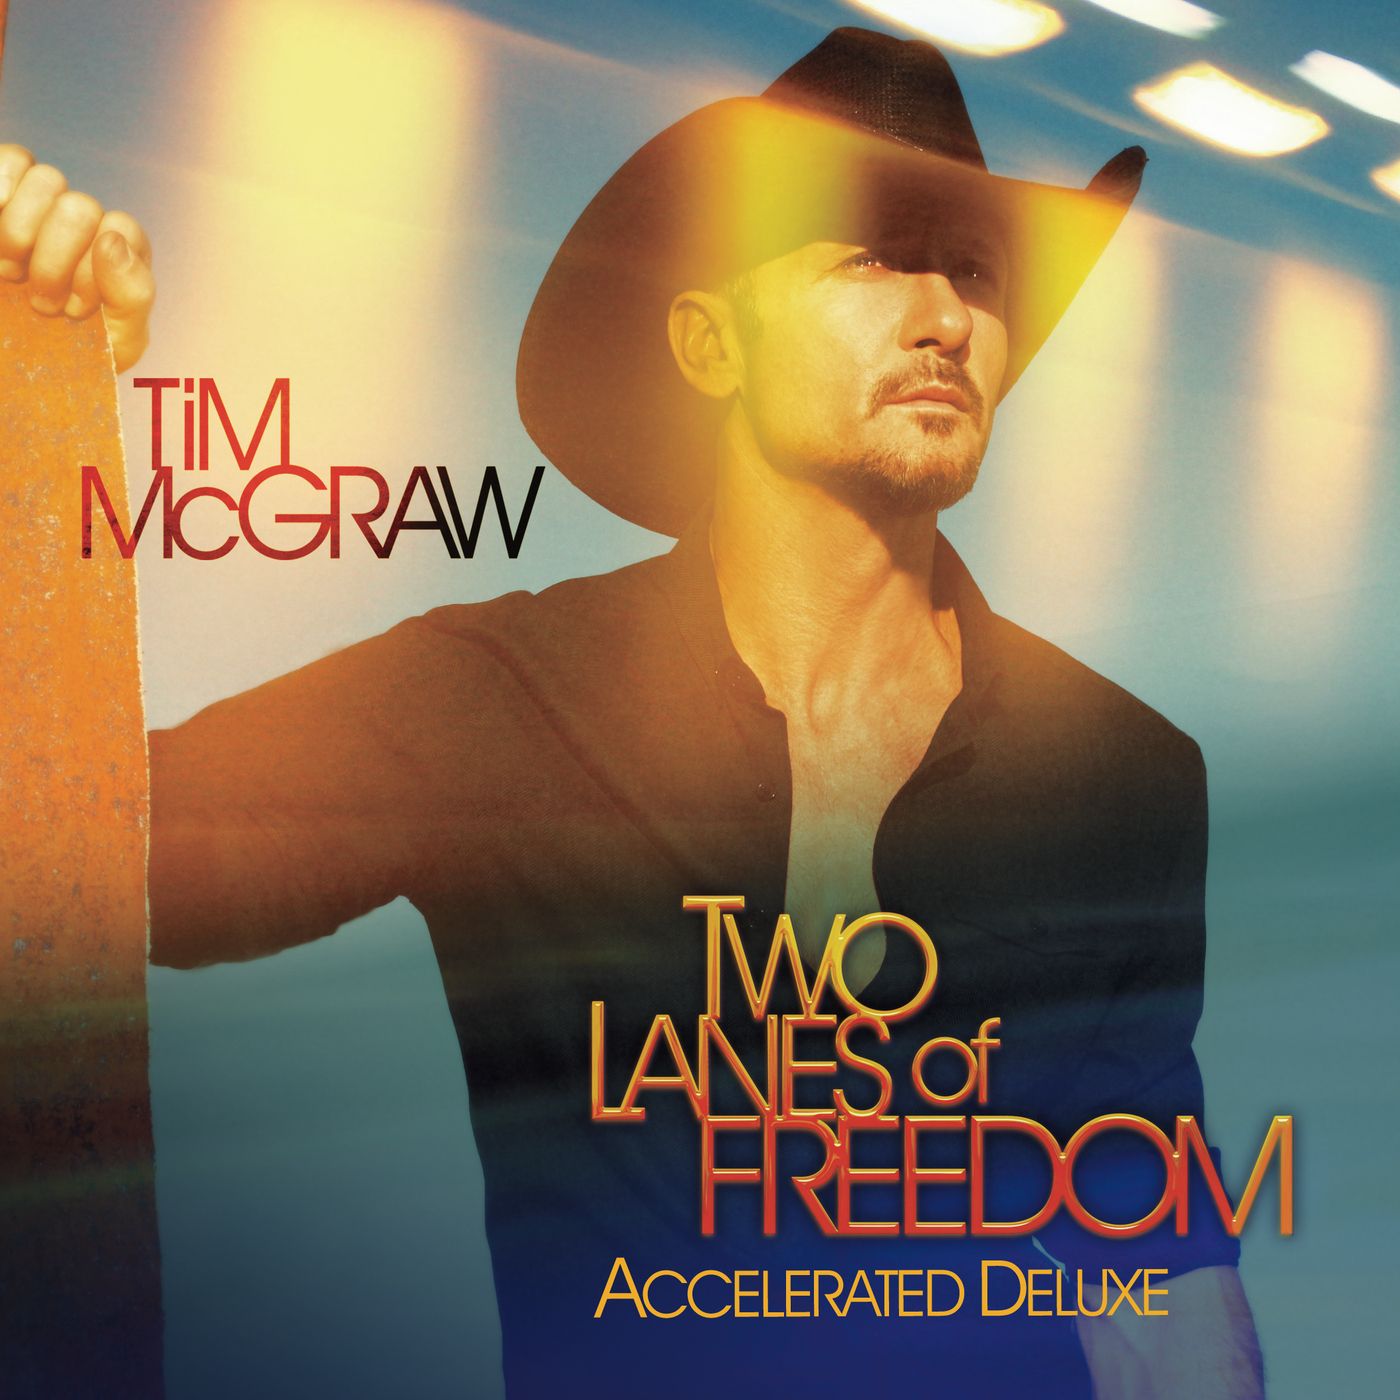 Tim McGraw - Two Lanes of Freedom Album Cover